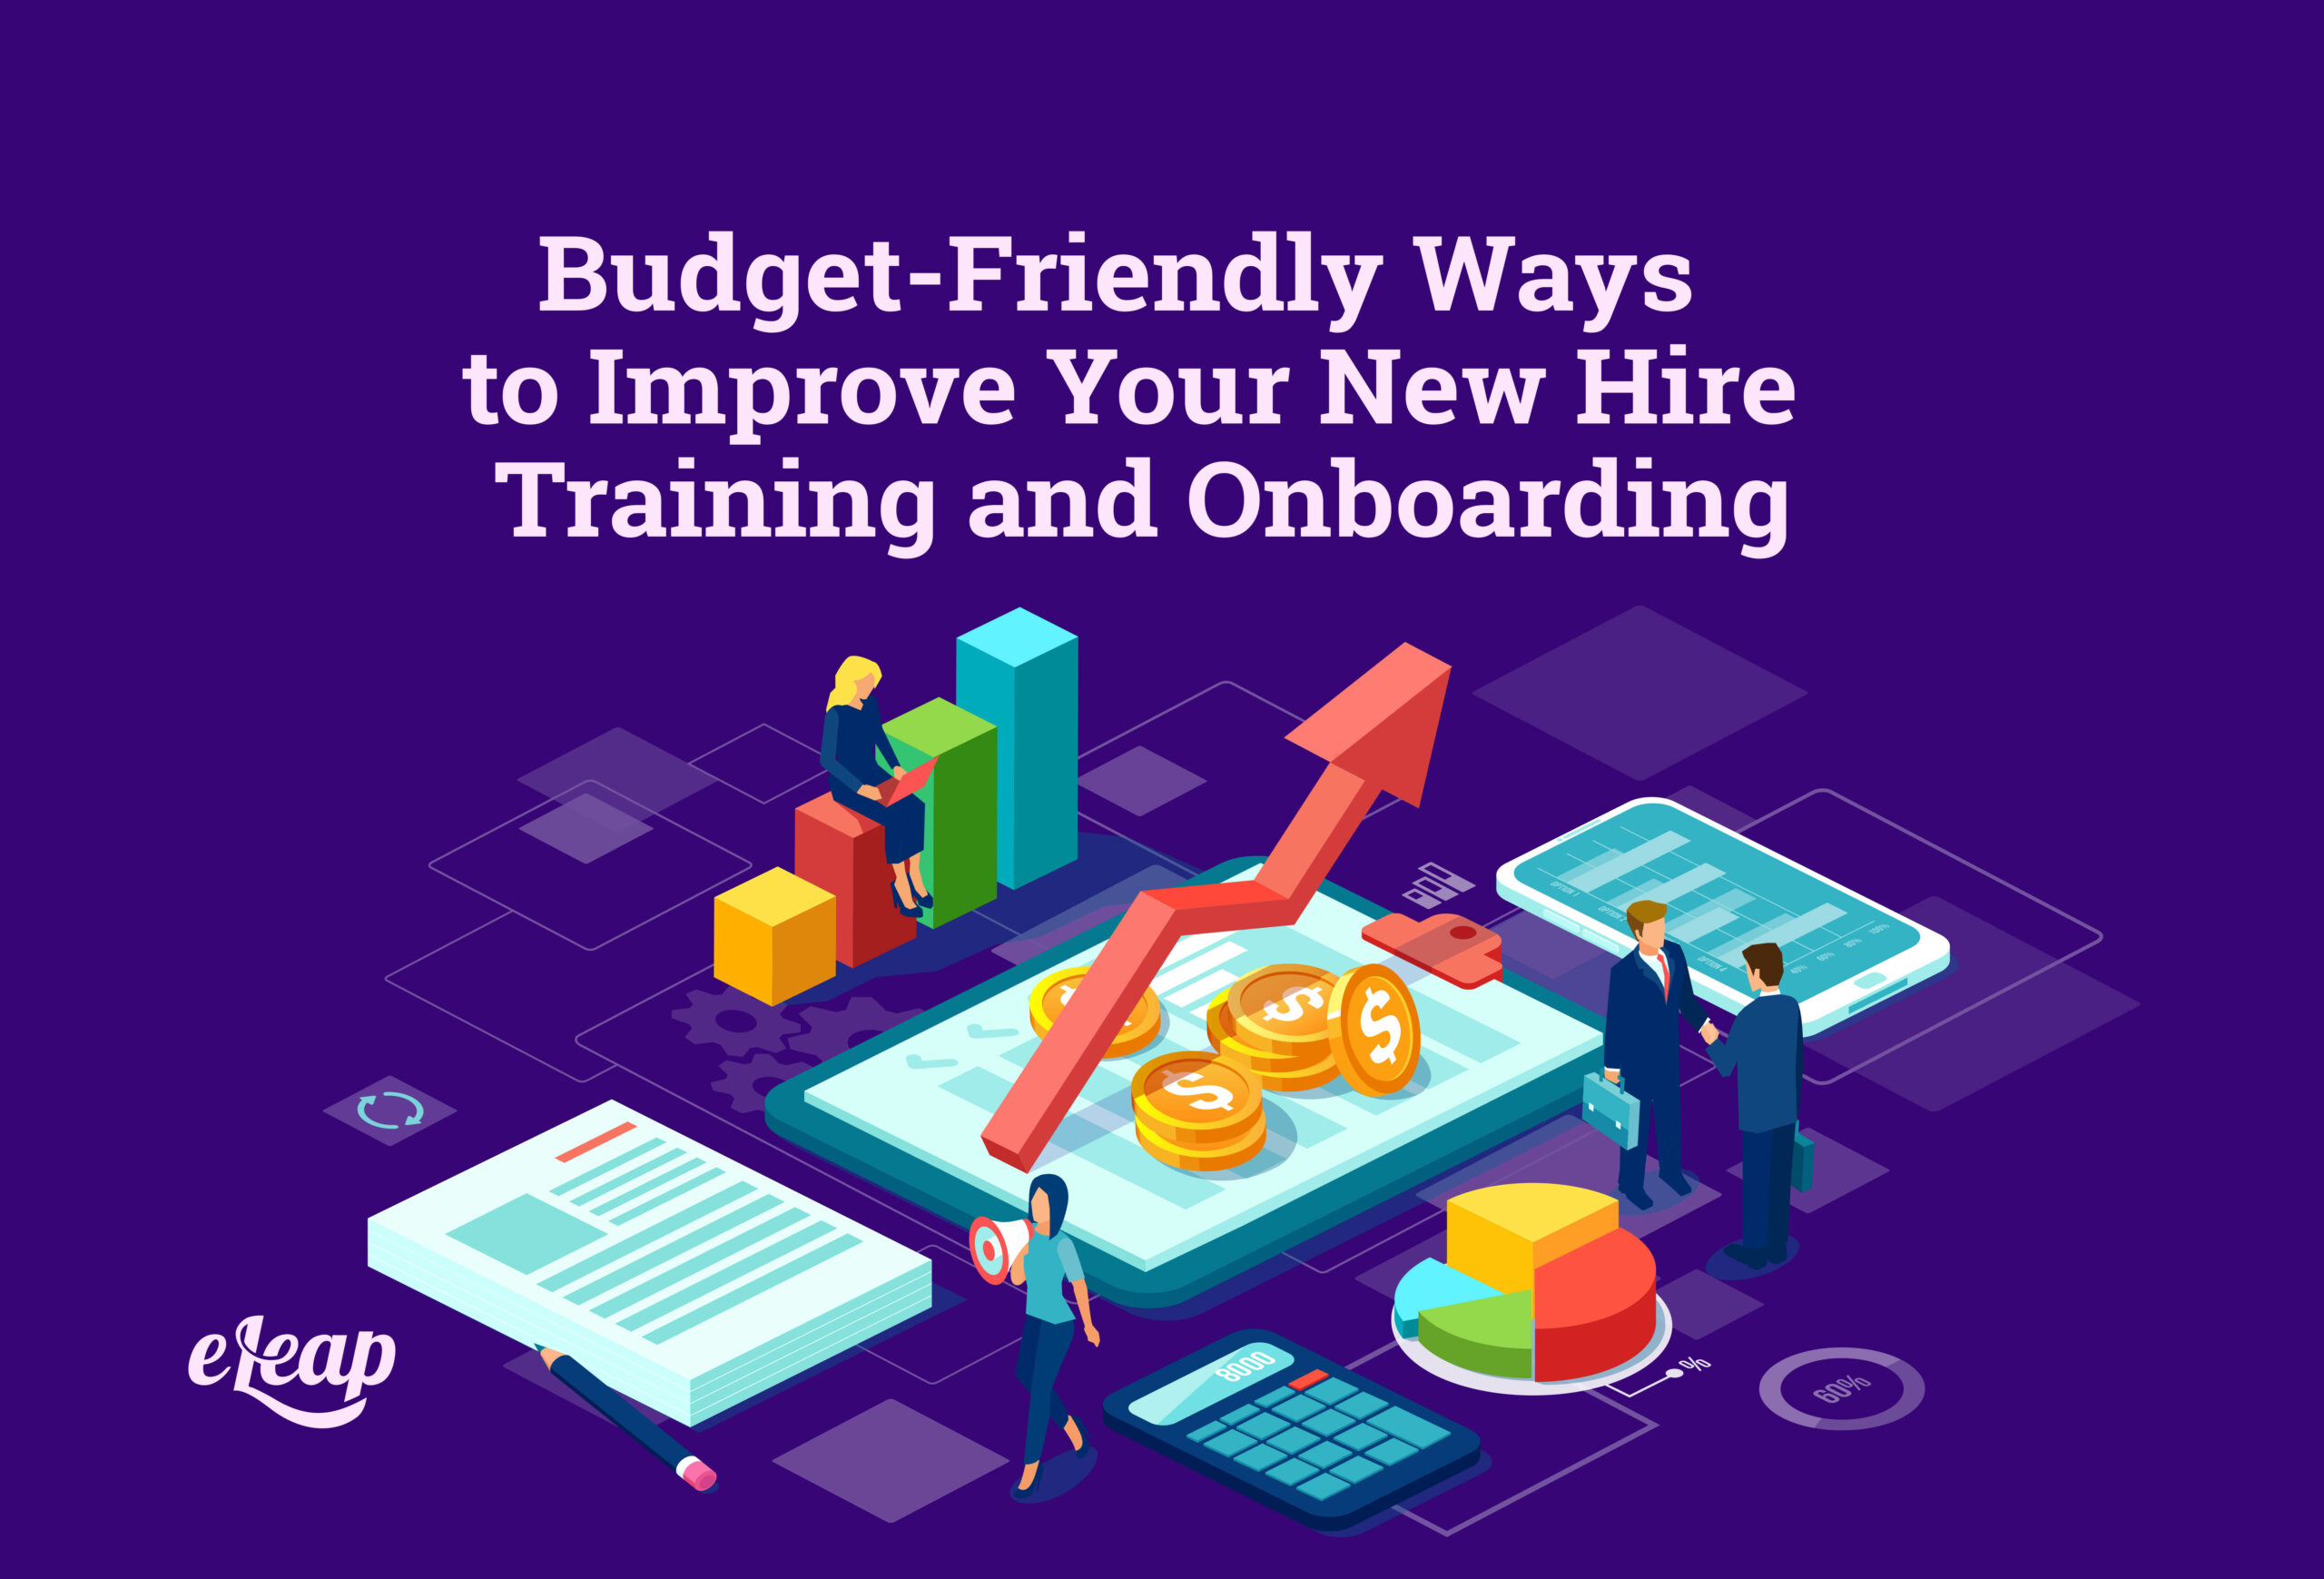 Budget-Friendly Ways to Improve Your New Hire Training and Onboarding